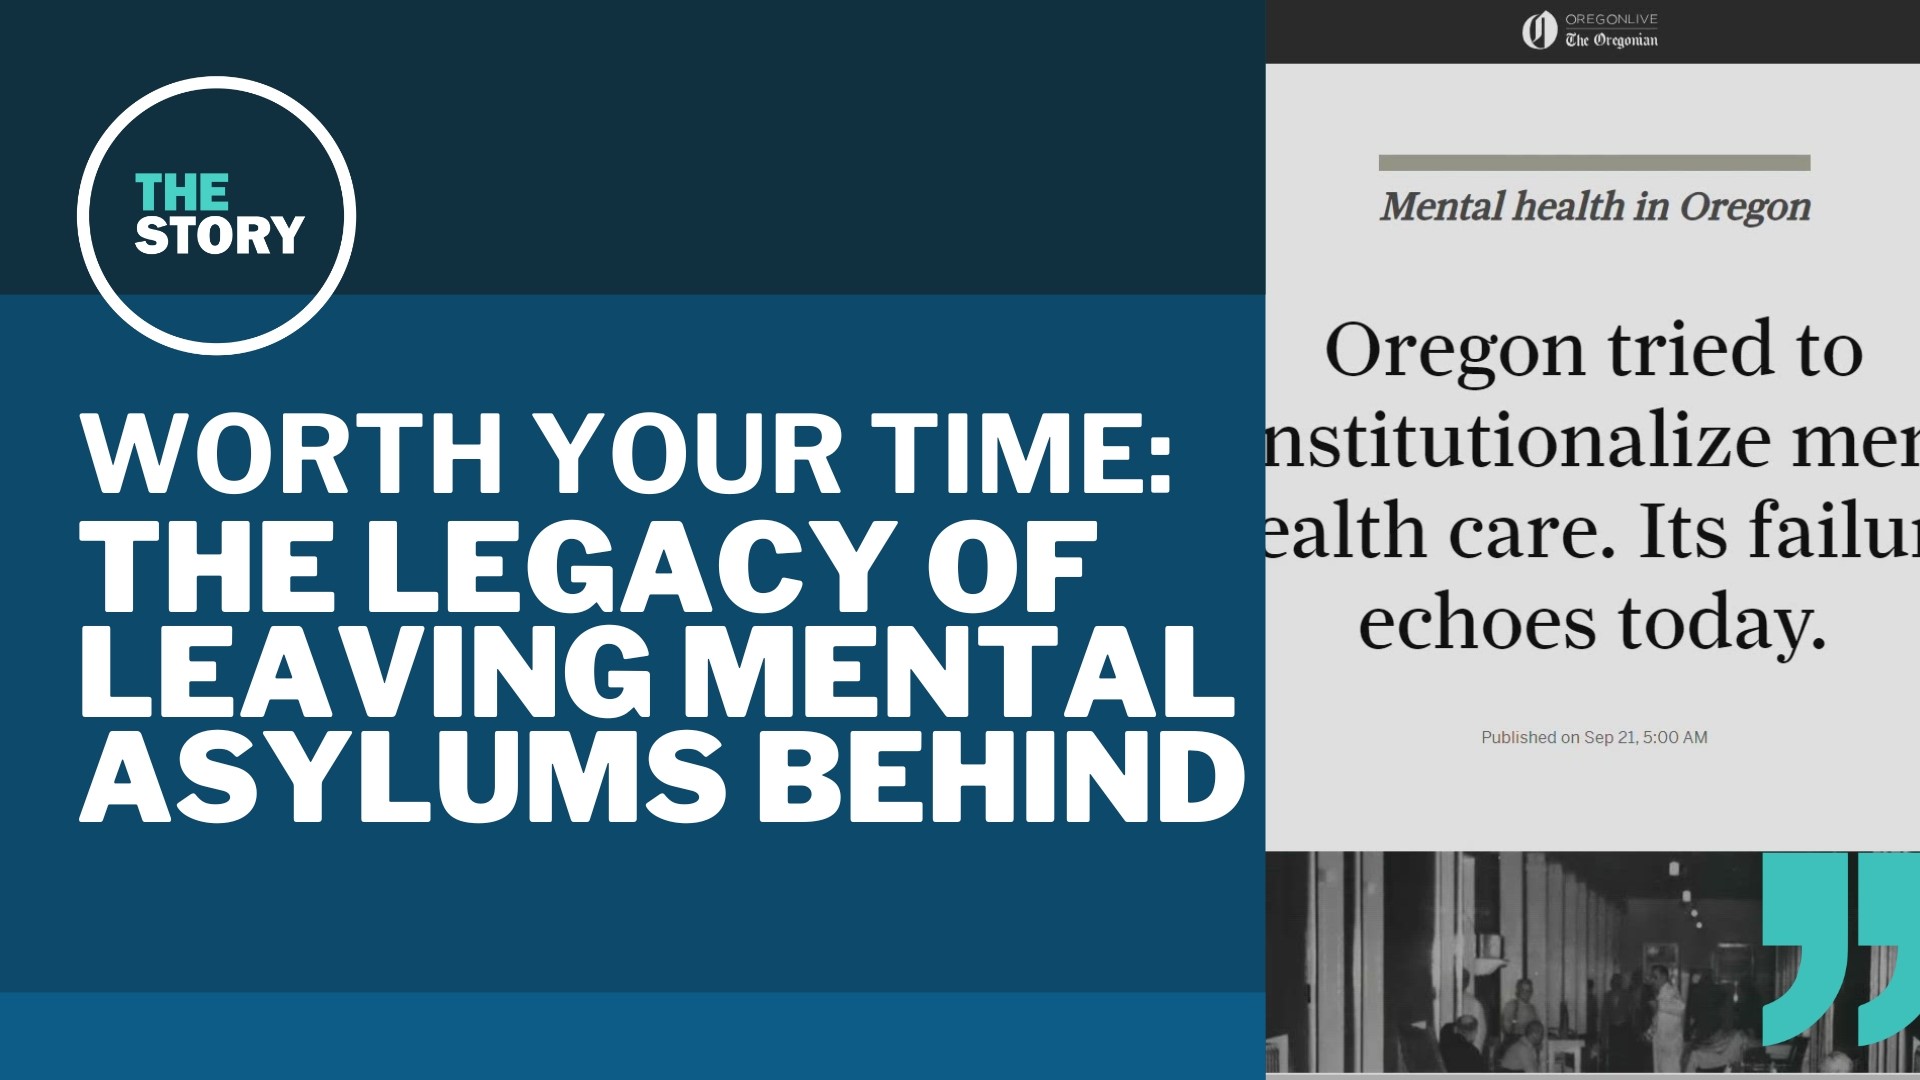 The Oregonian dug into the lasting impacts of the state's move away from asylum care, including some of the good intentions behind it that went unfulfilled.